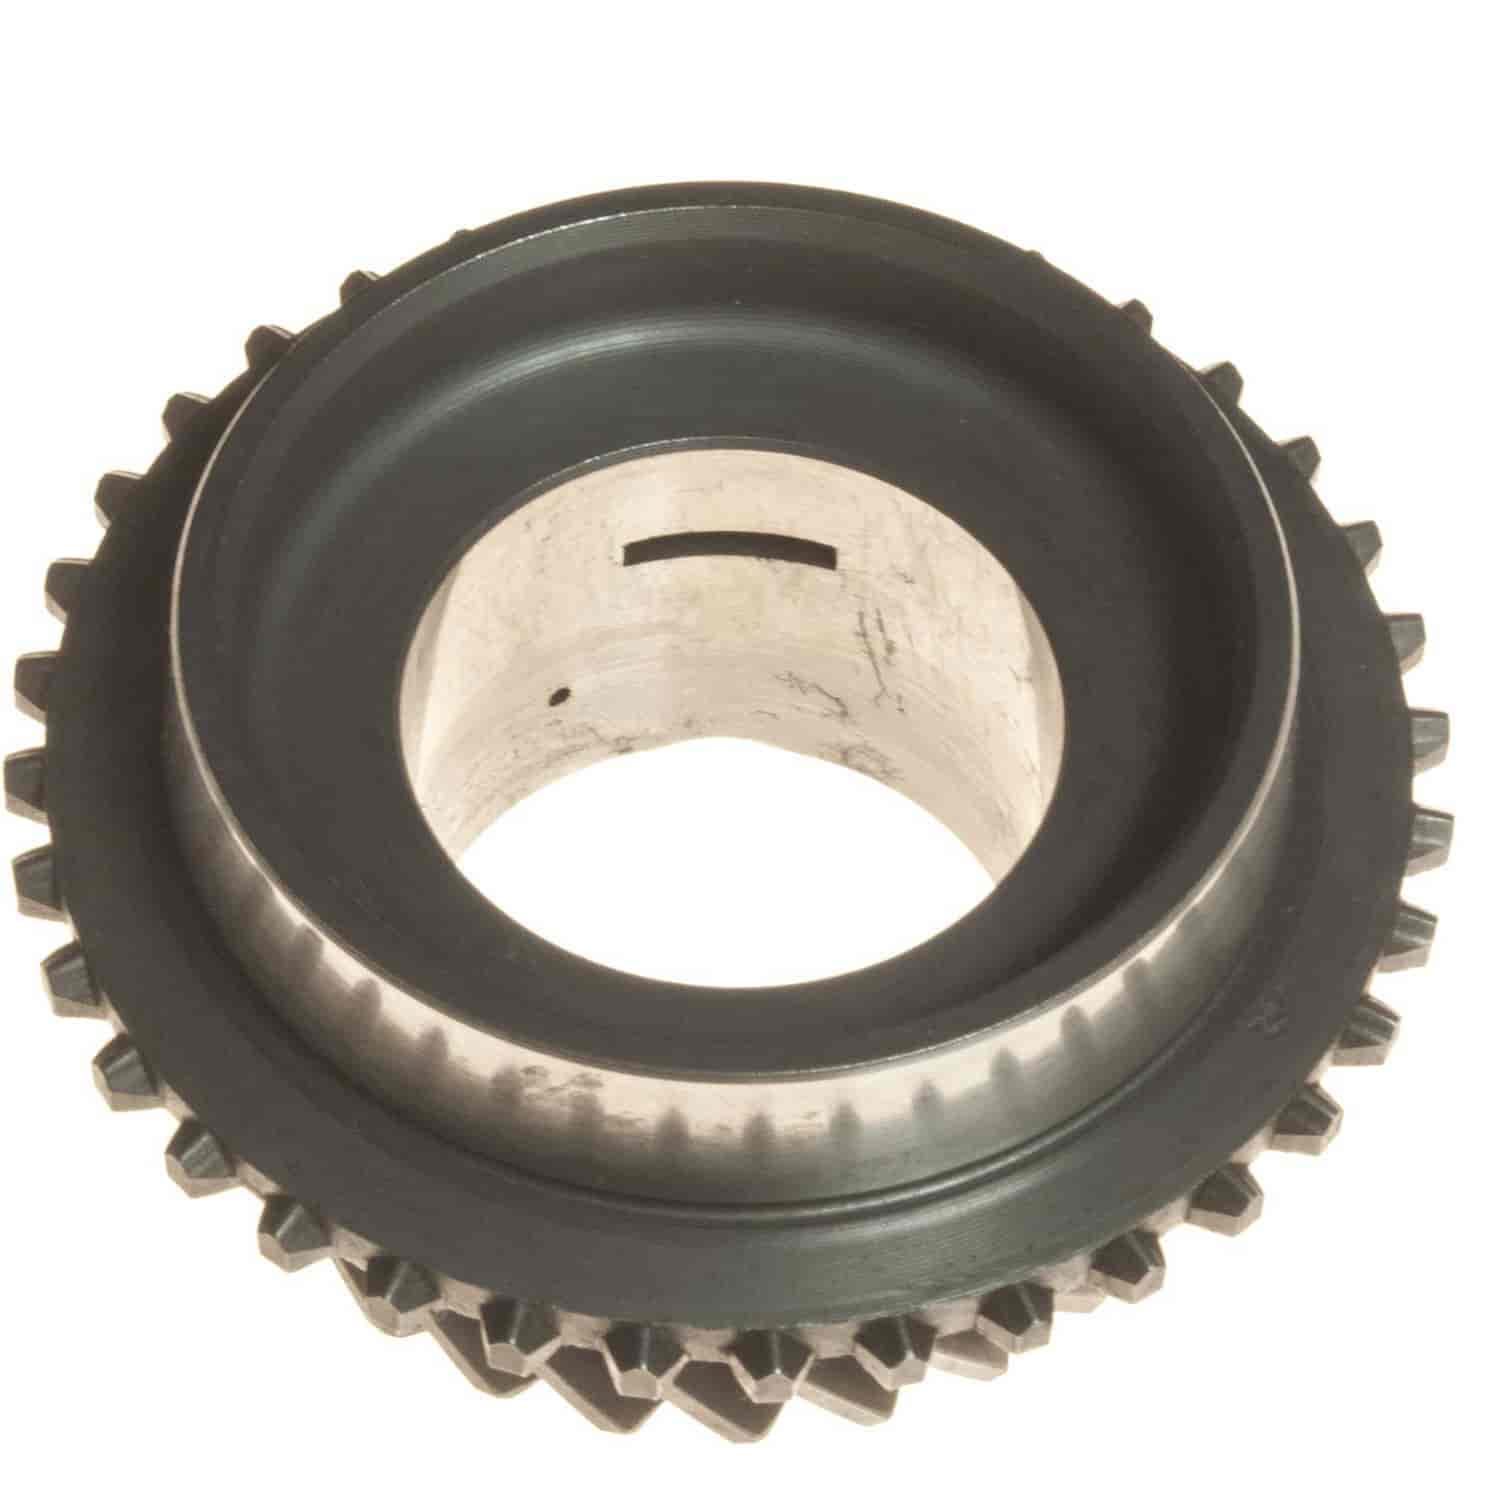 6th Gear Mainshaft 25/52 Tooth Count